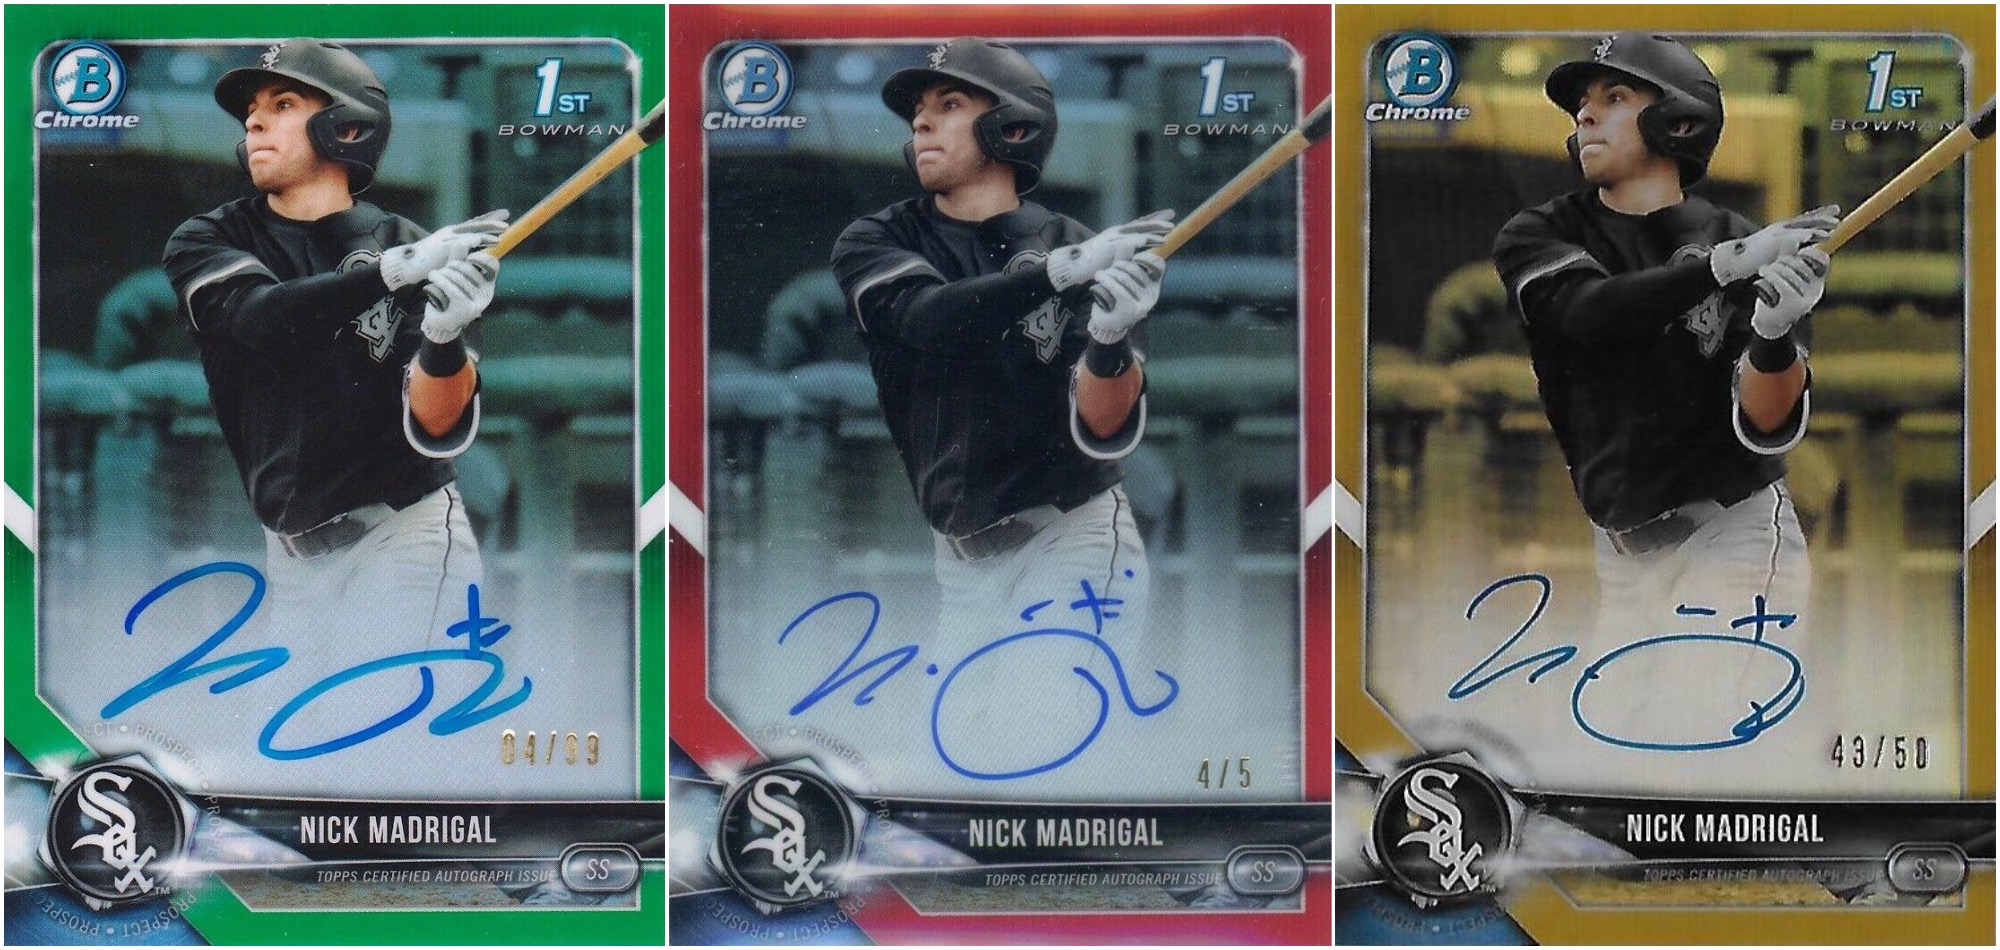 Three images of Nick Madrigal sports trading cards